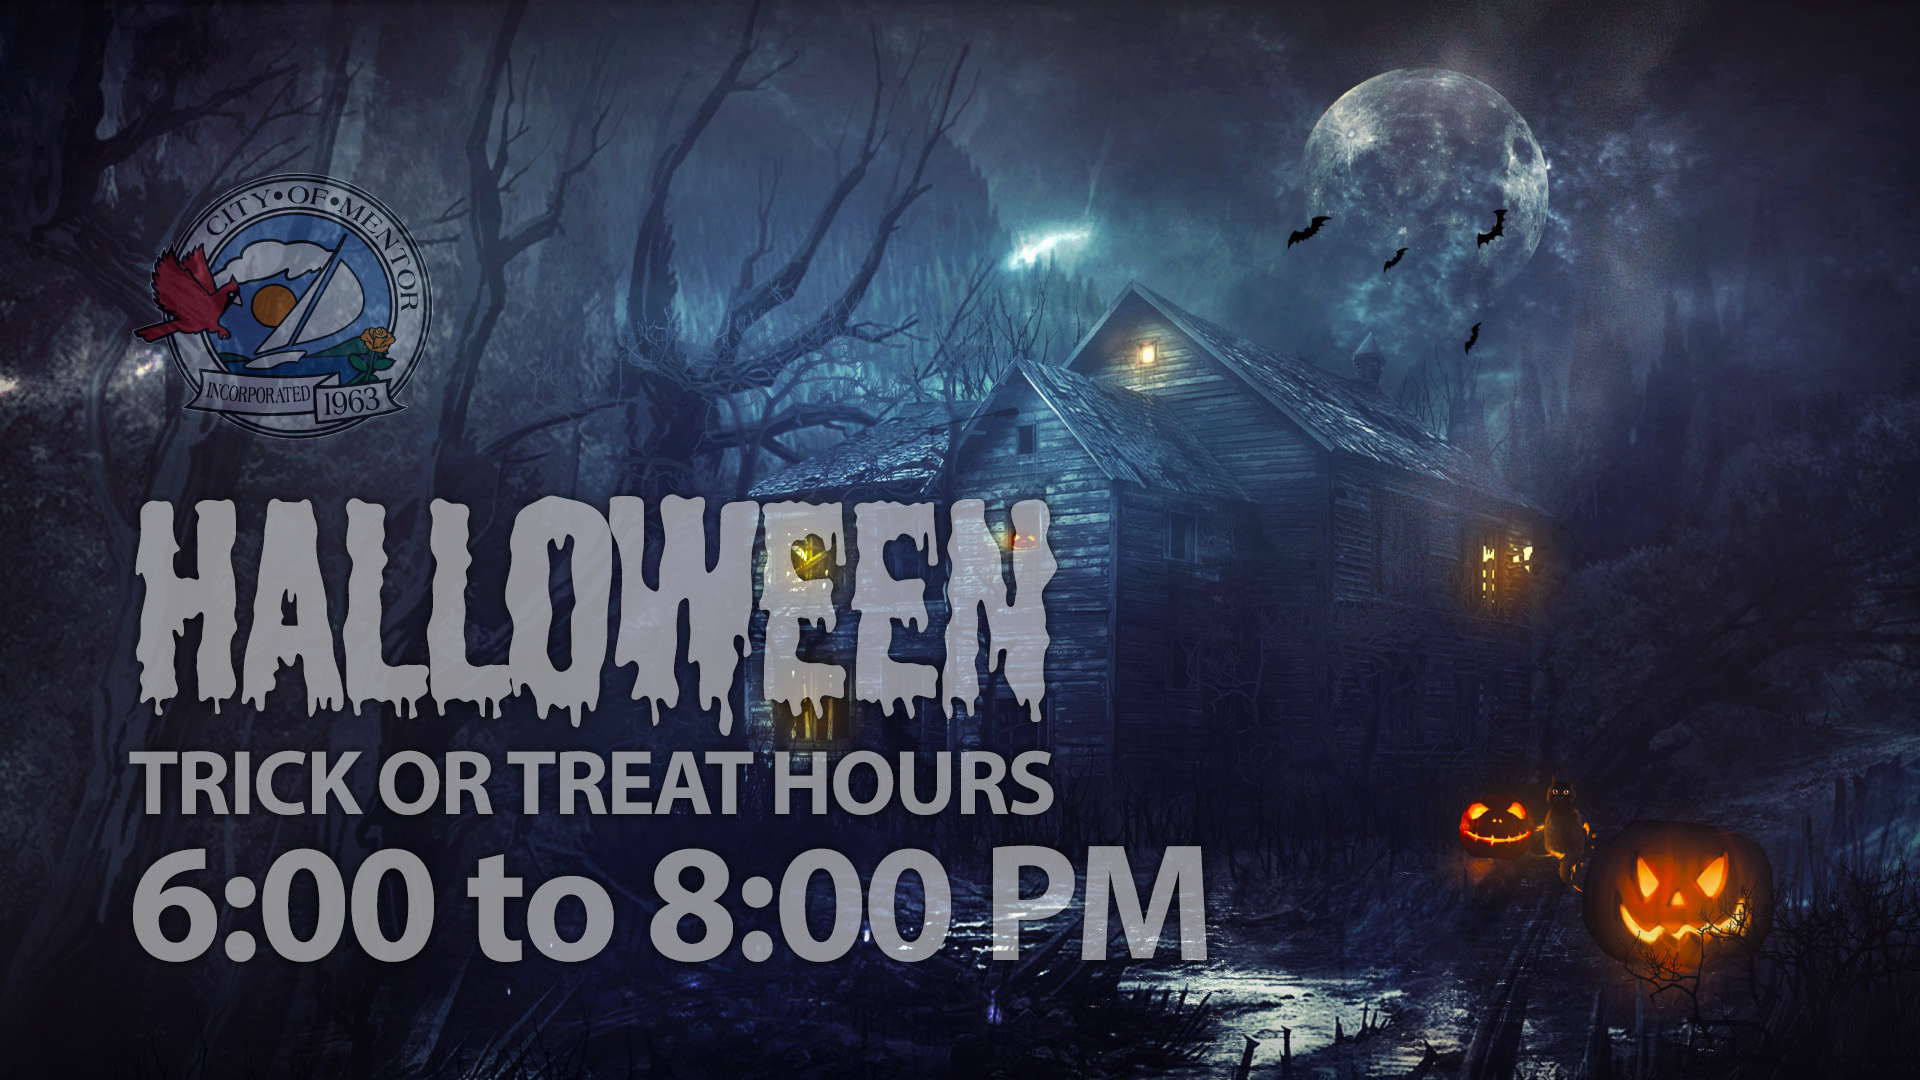 Halloween Trick or Treat hours are 6 PM to 8 PM in the city of Mentor.